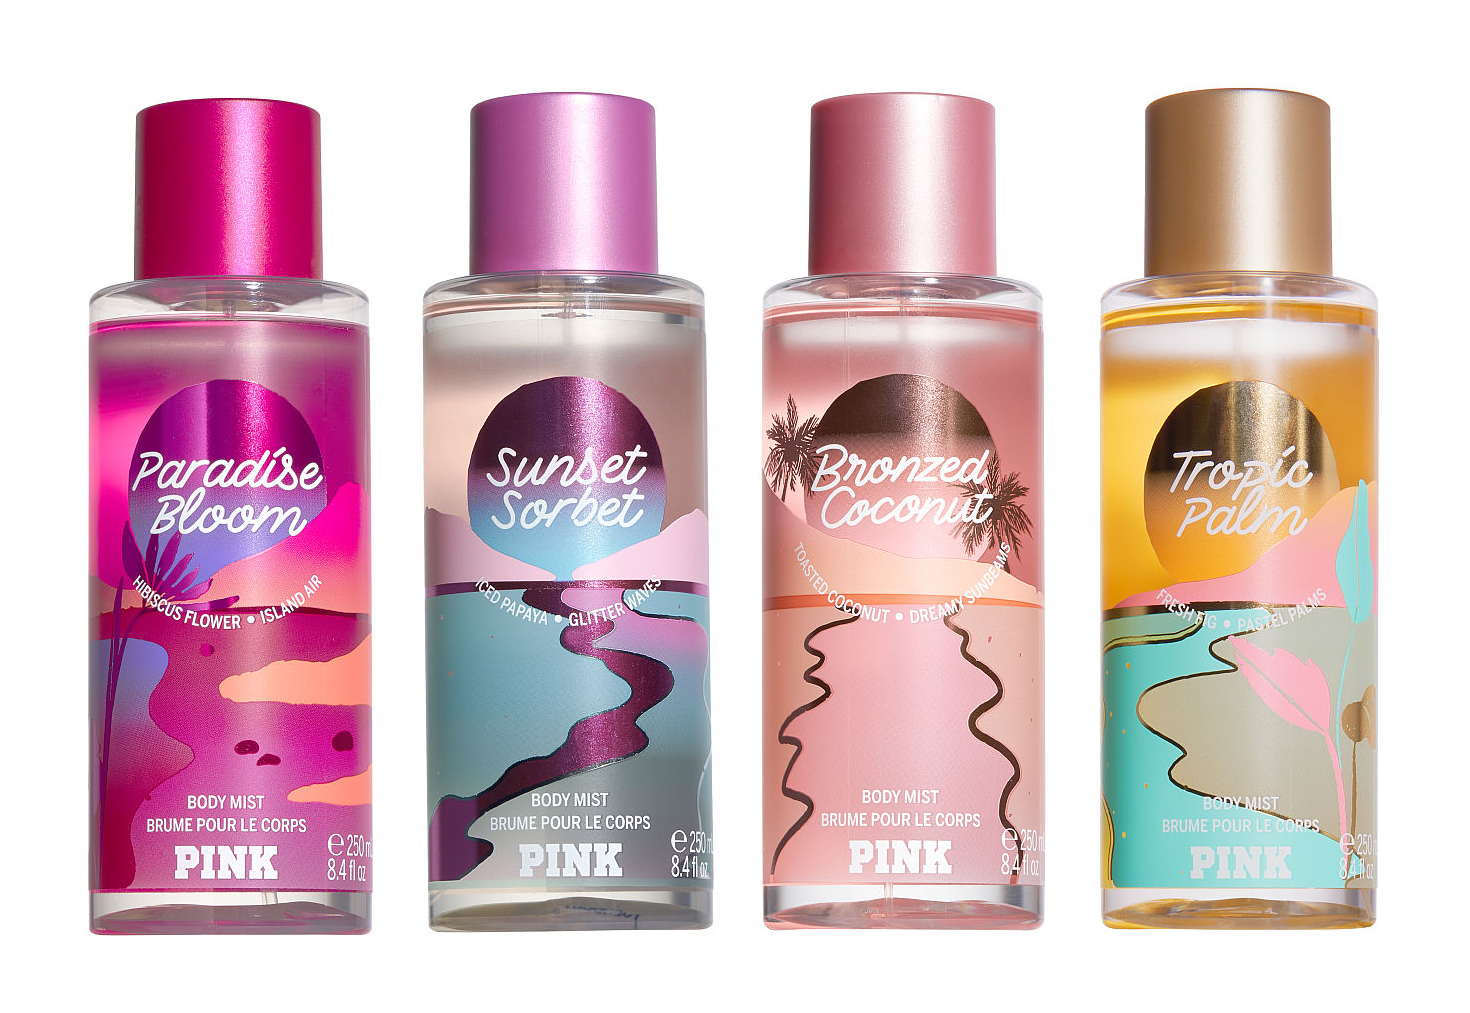 Voornaamwoord overdracht Onderhoud Victoria's Secret Pink Paradise Collection Offers Bronze on Demand with the  Bronzed Coconut Collection! ~ Bath & Body